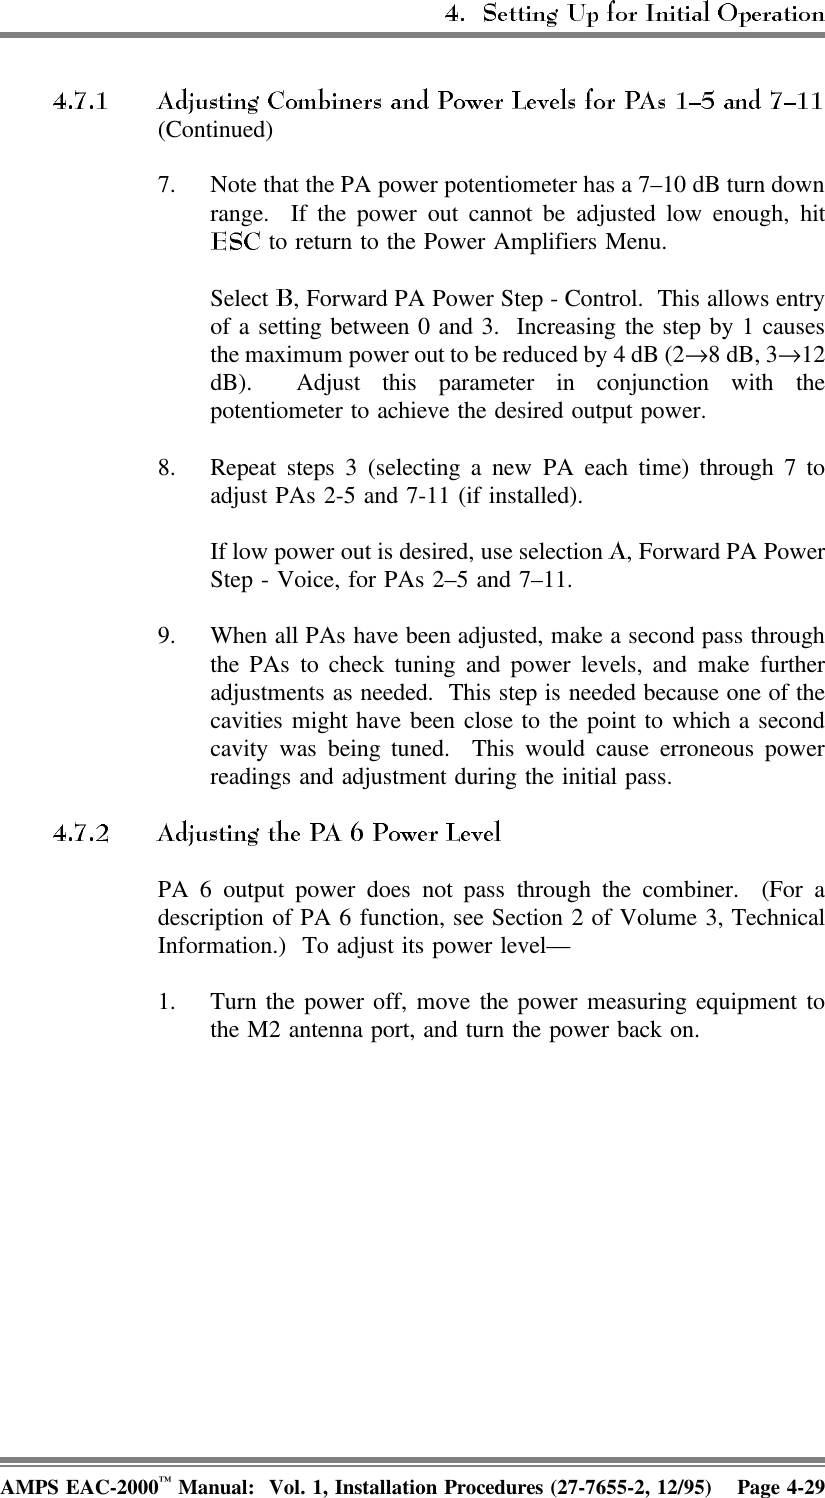 (Continued)7. Note that the PA power potentiometer has a 7–10 dB turn downrange.  If the power out cannot be adjusted low enough, hit to return to the Power Amplifiers Menu.Select  , Forward PA Power Step - Control.  This allows entryof a setting between 0 and 3.  Increasing the step by 1 causesthe maximum power out to be reduced by 4 dB (2→8 dB, 3→12dB).  Adjust this parameter in conjunction with thepotentiometer to achieve the desired output power.8. Repeat steps 3 (selecting a new PA each time) through 7 toadjust PAs 2-5 and 7-11 (if installed).If low power out is desired, use selection  , Forward PA PowerStep - Voice, for PAs 2–5 and 7–11. 9. When all PAs have been adjusted, make a second pass throughthe PAs to check tuning and power levels, and make furtheradjustments as needed.  This step is needed because one of thecavities might have been close to the point to which a secondcavity was being tuned.  This would cause erroneous powerreadings and adjustment during the initial pass.PA 6 output power does not pass through the combiner.  (For adescription of PA 6 function, see Section 2 of Volume 3, TechnicalInformation.)  To adjust its power level—1. Turn the power off, move the power measuring equipment tothe M2 antenna port, and turn the power back on.AMPS EAC-2000™ Manual:  Vol. 1, Installation Procedures (27-7655-2, 12/95) Page 4-29